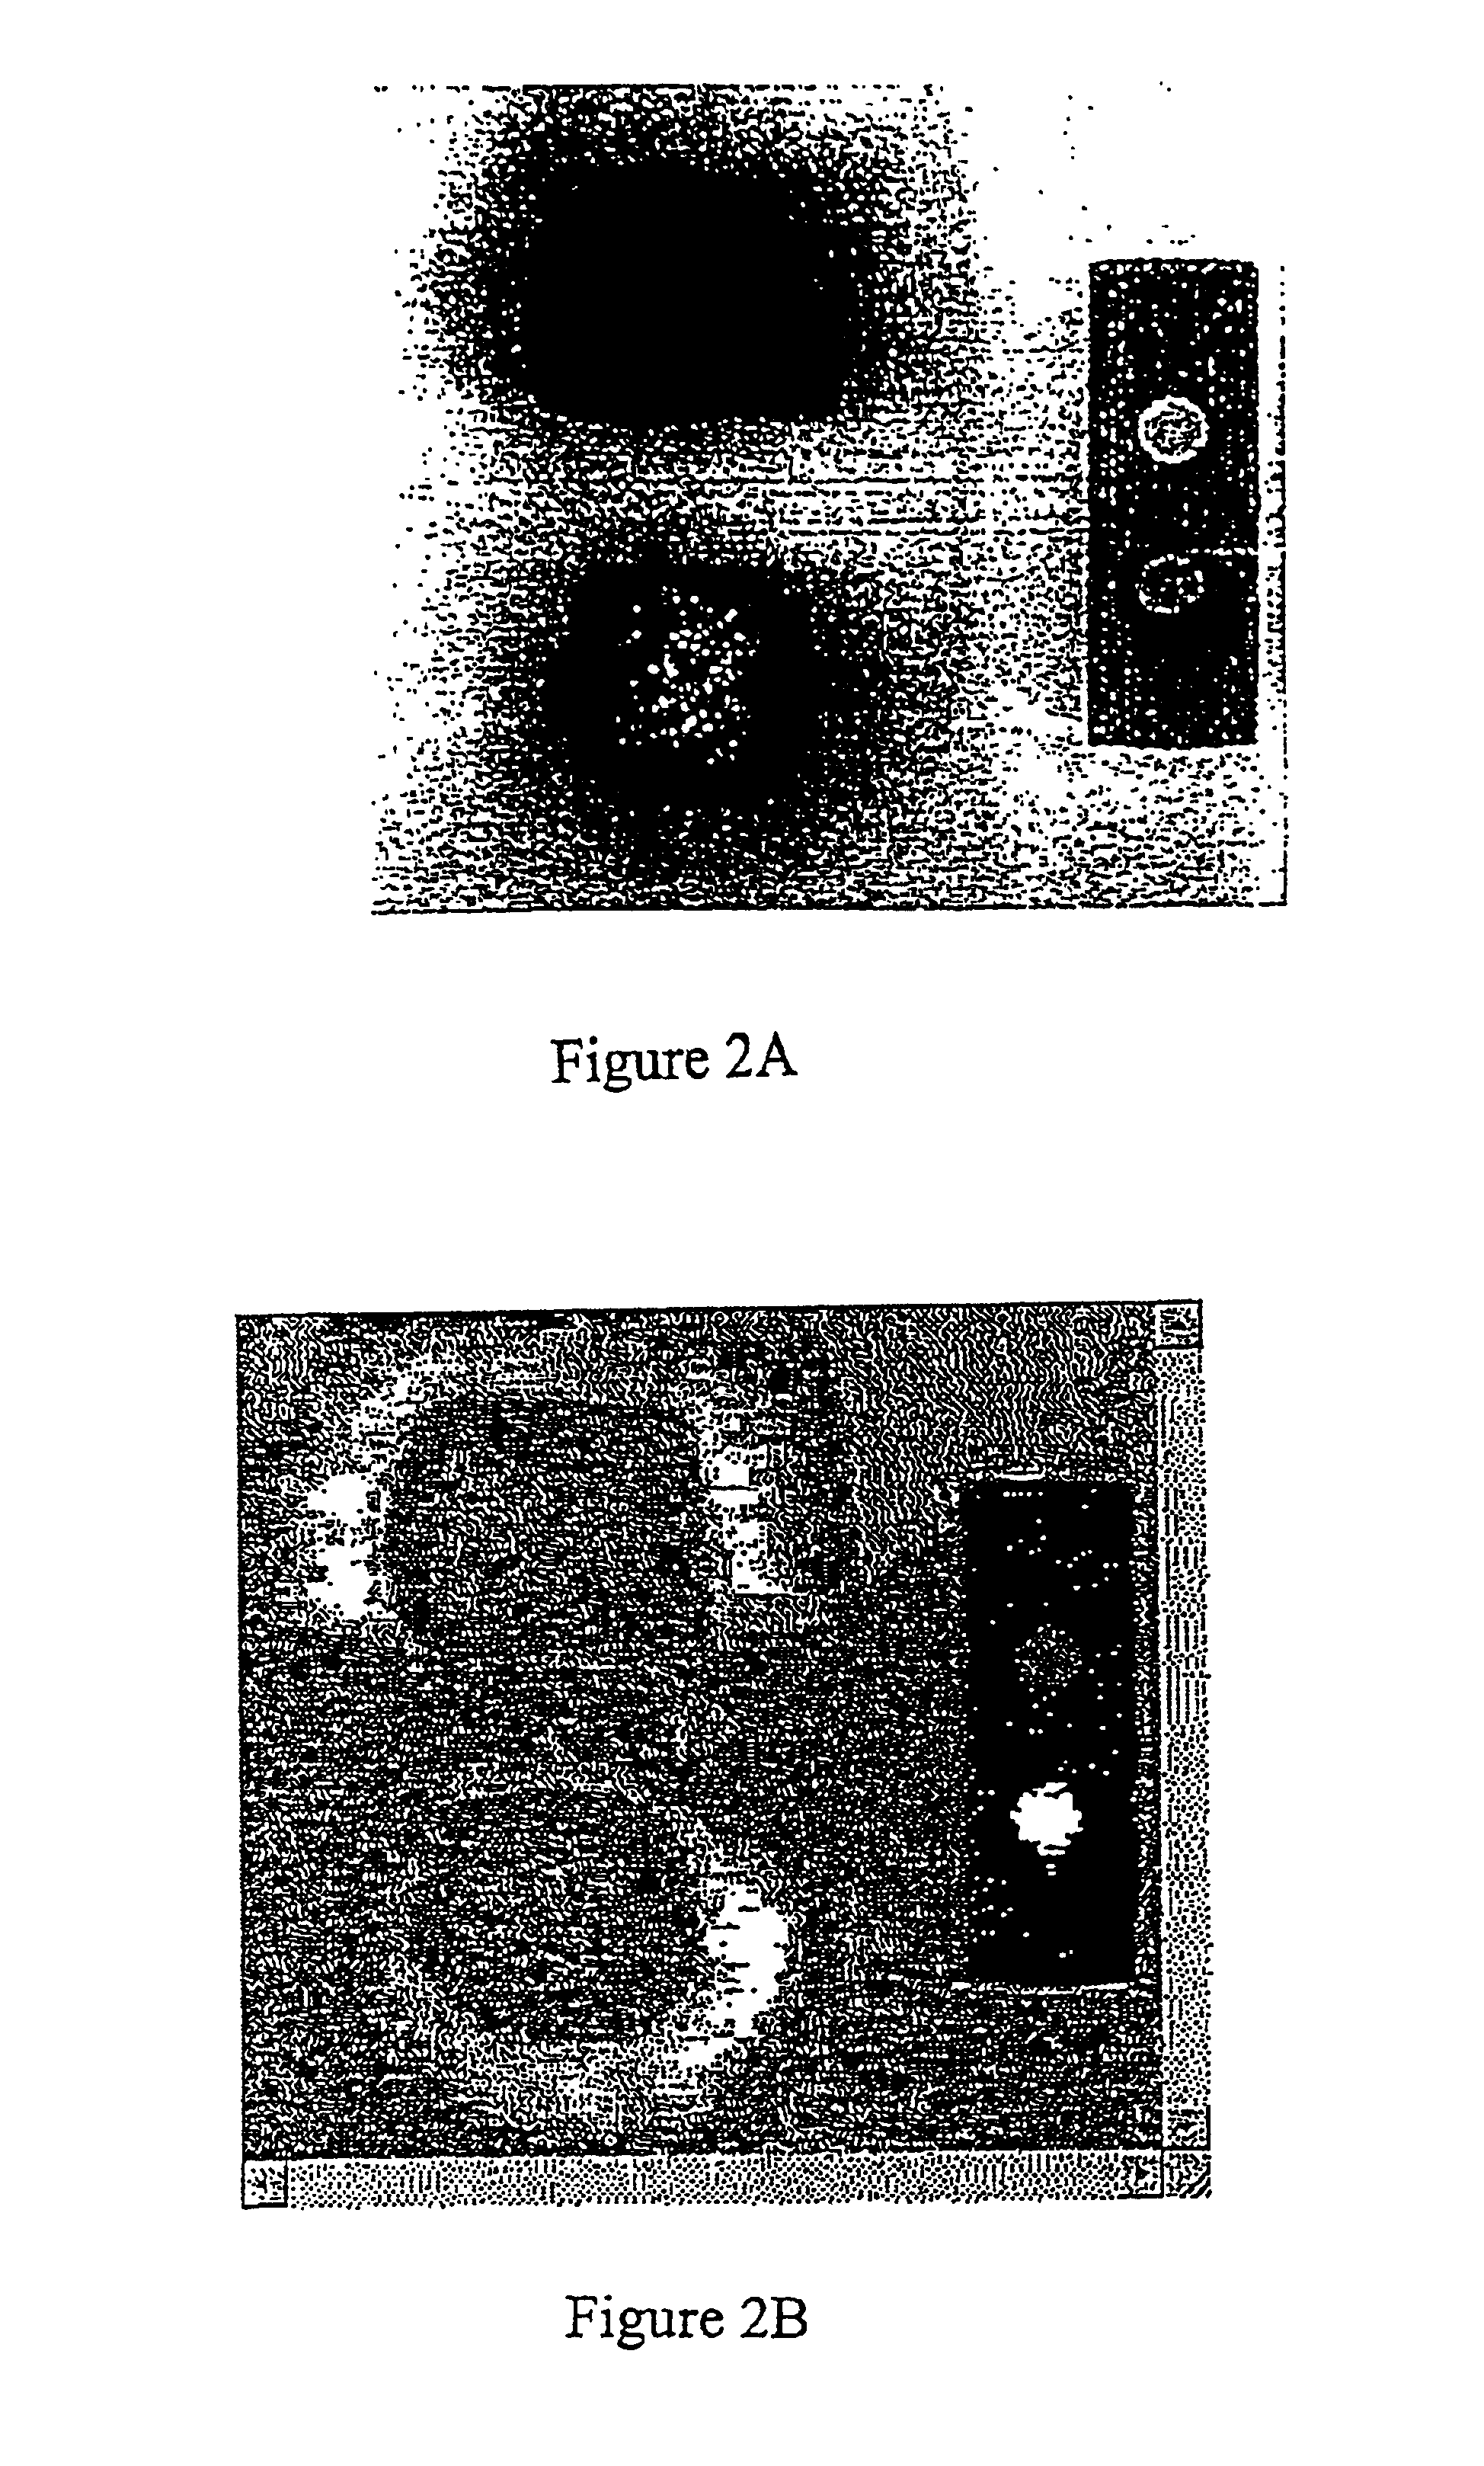 Devices and methods for reading and interpreting guaiac-based occult blood tests